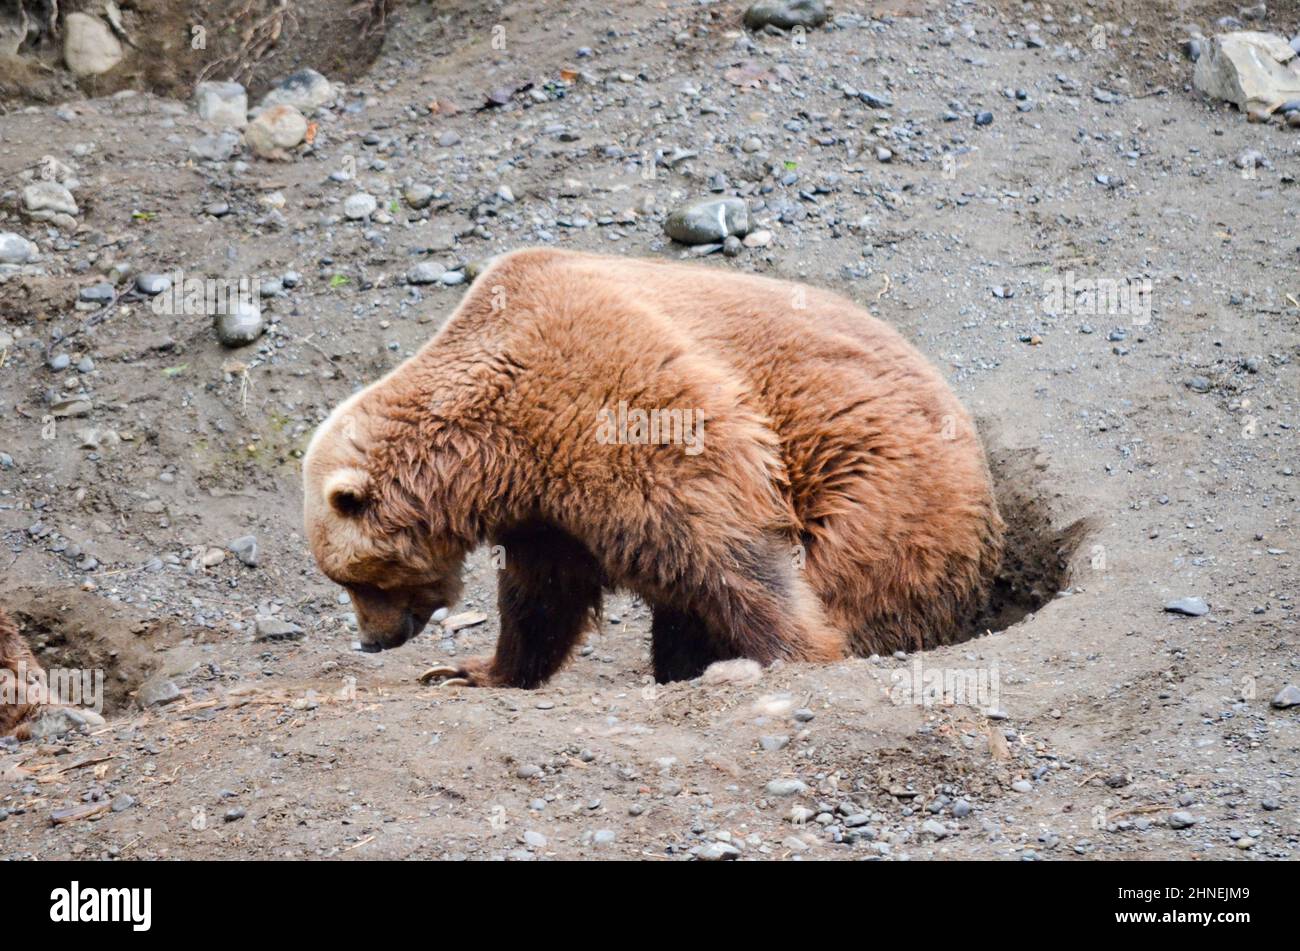 Spectacular grizzly bears resting in holes of soil dug by them in zoo in Alaska, USA, United States of America Stock Photo